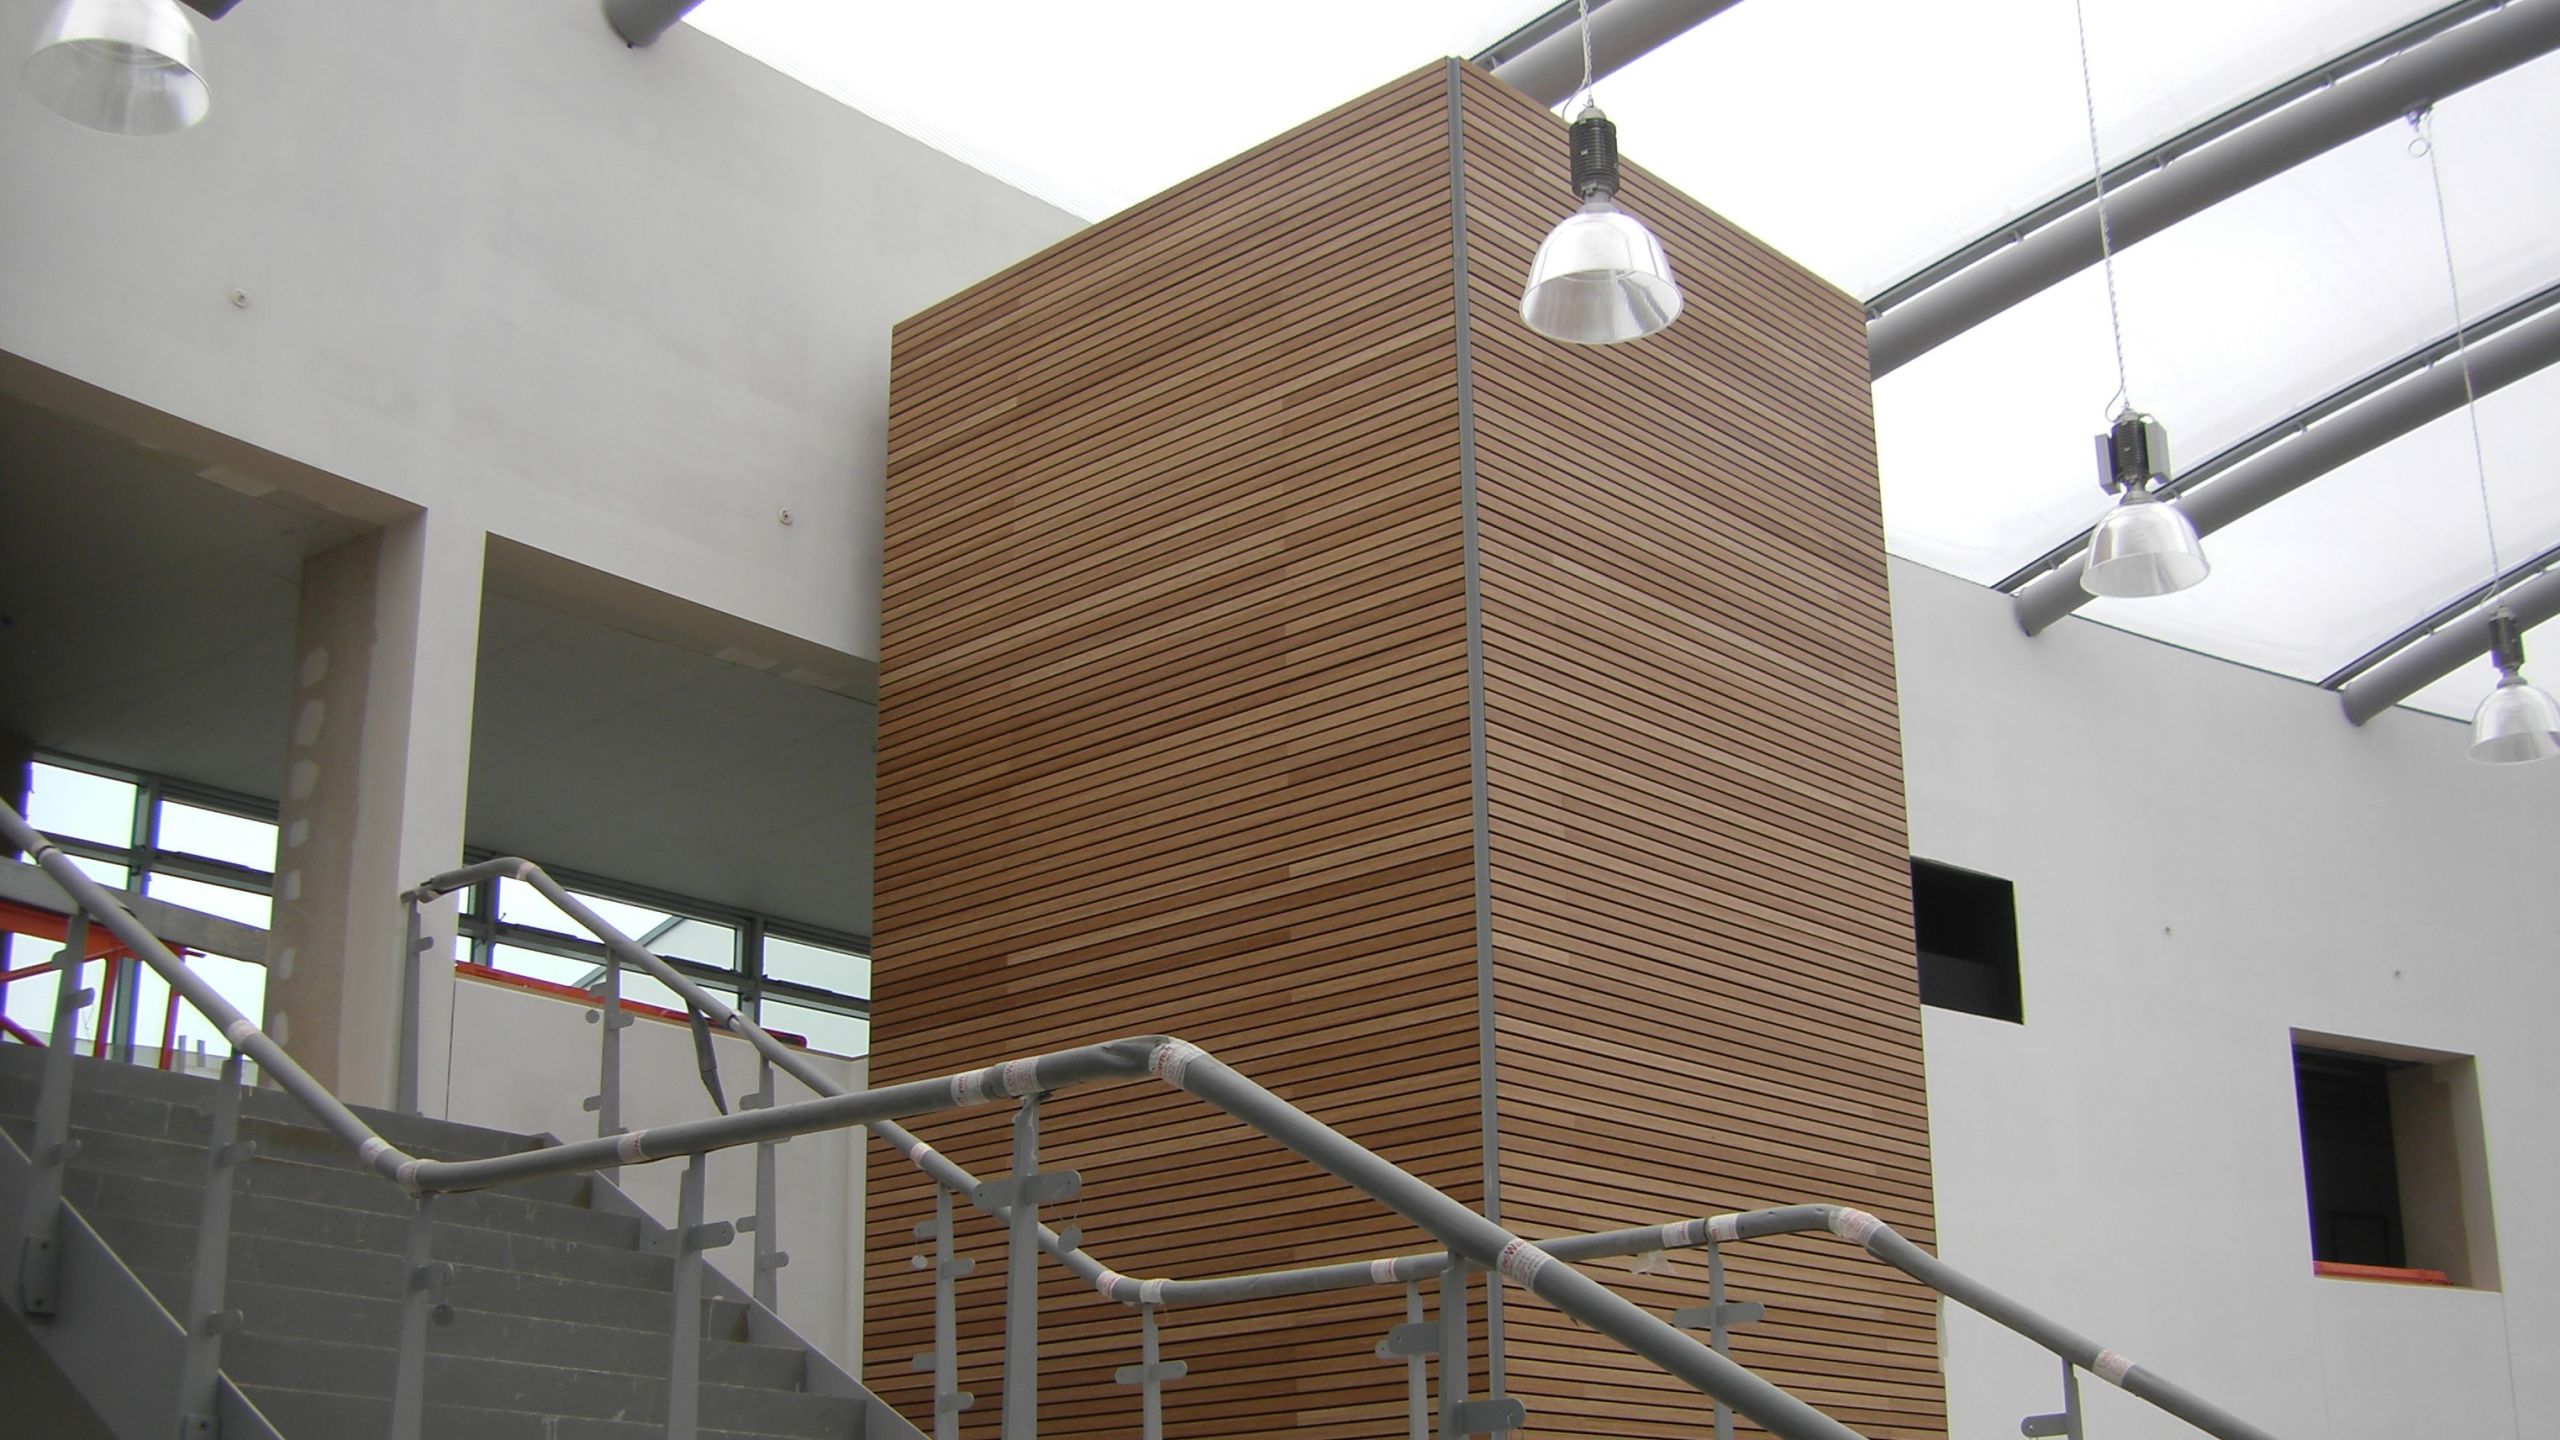 Timber Wall Panels at Cressex Community School by BCL Timber